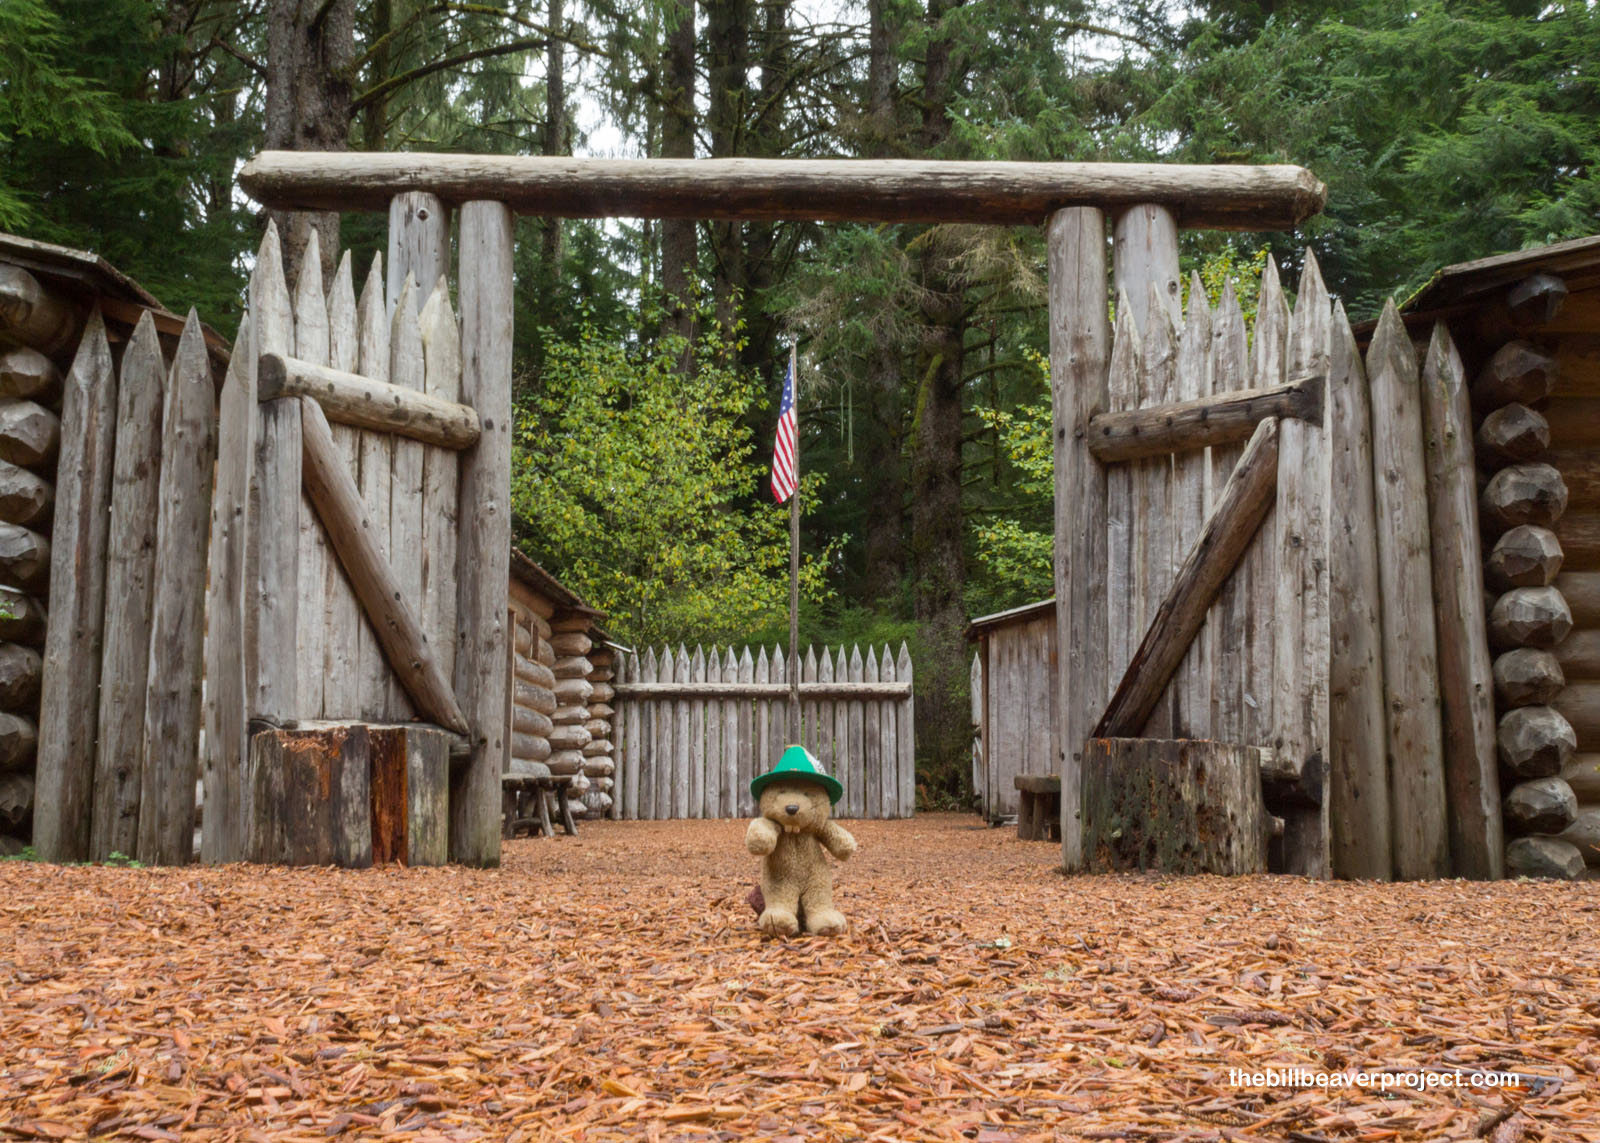 A detailed replica of Fort Clatsop!